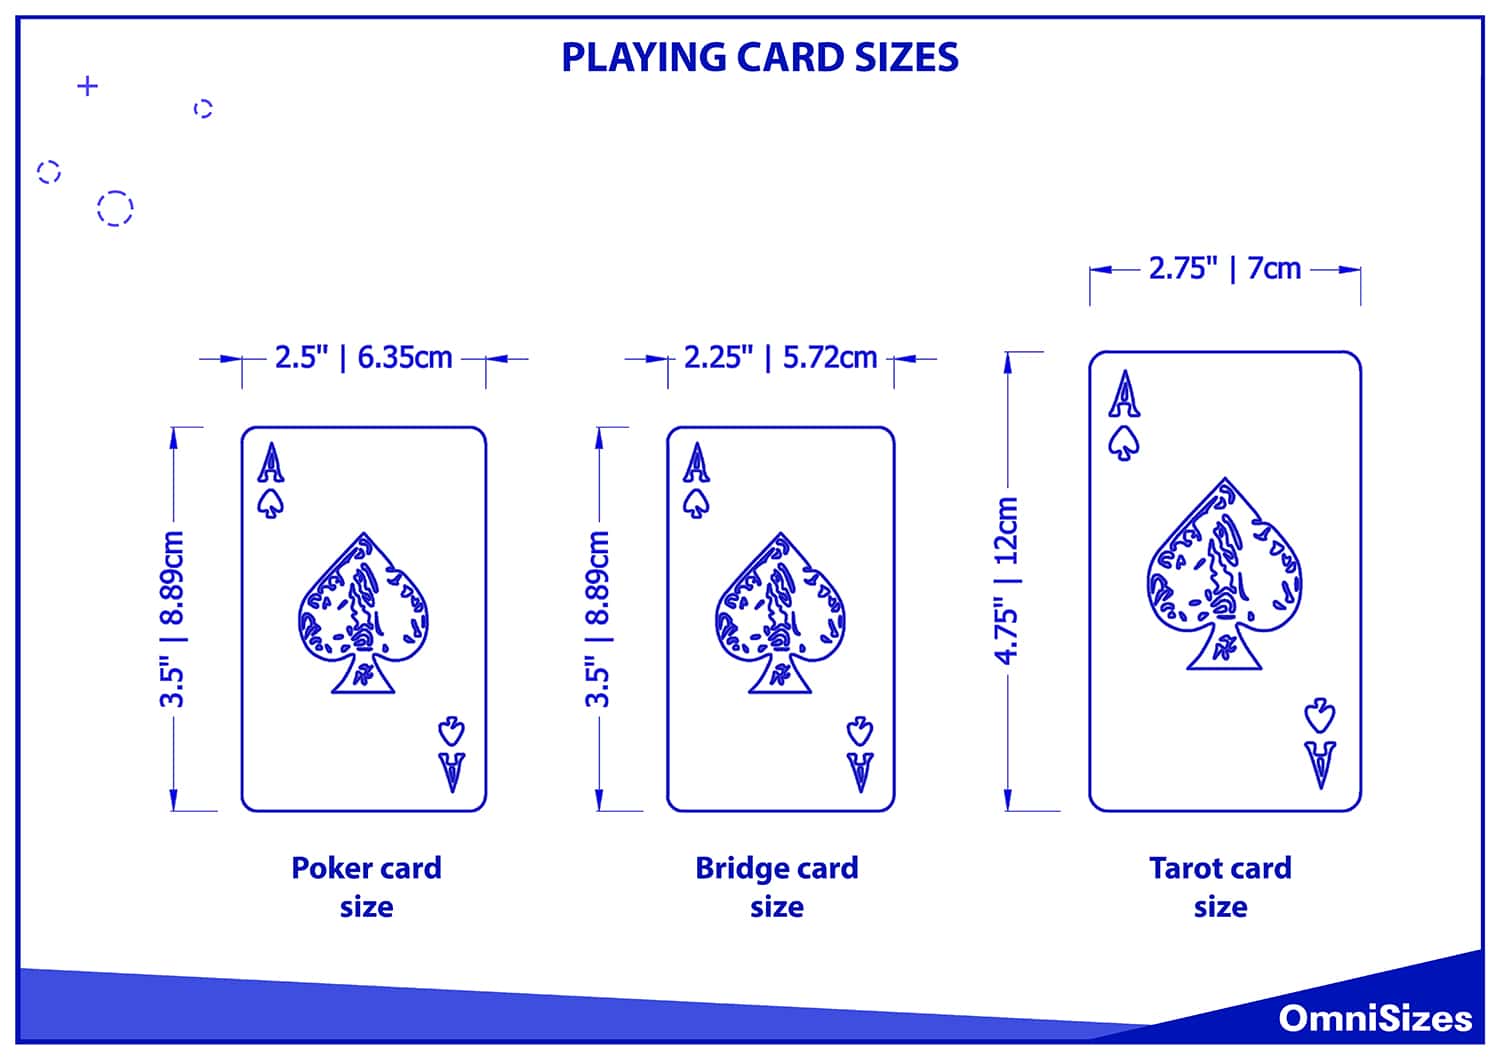 Playing card sizes